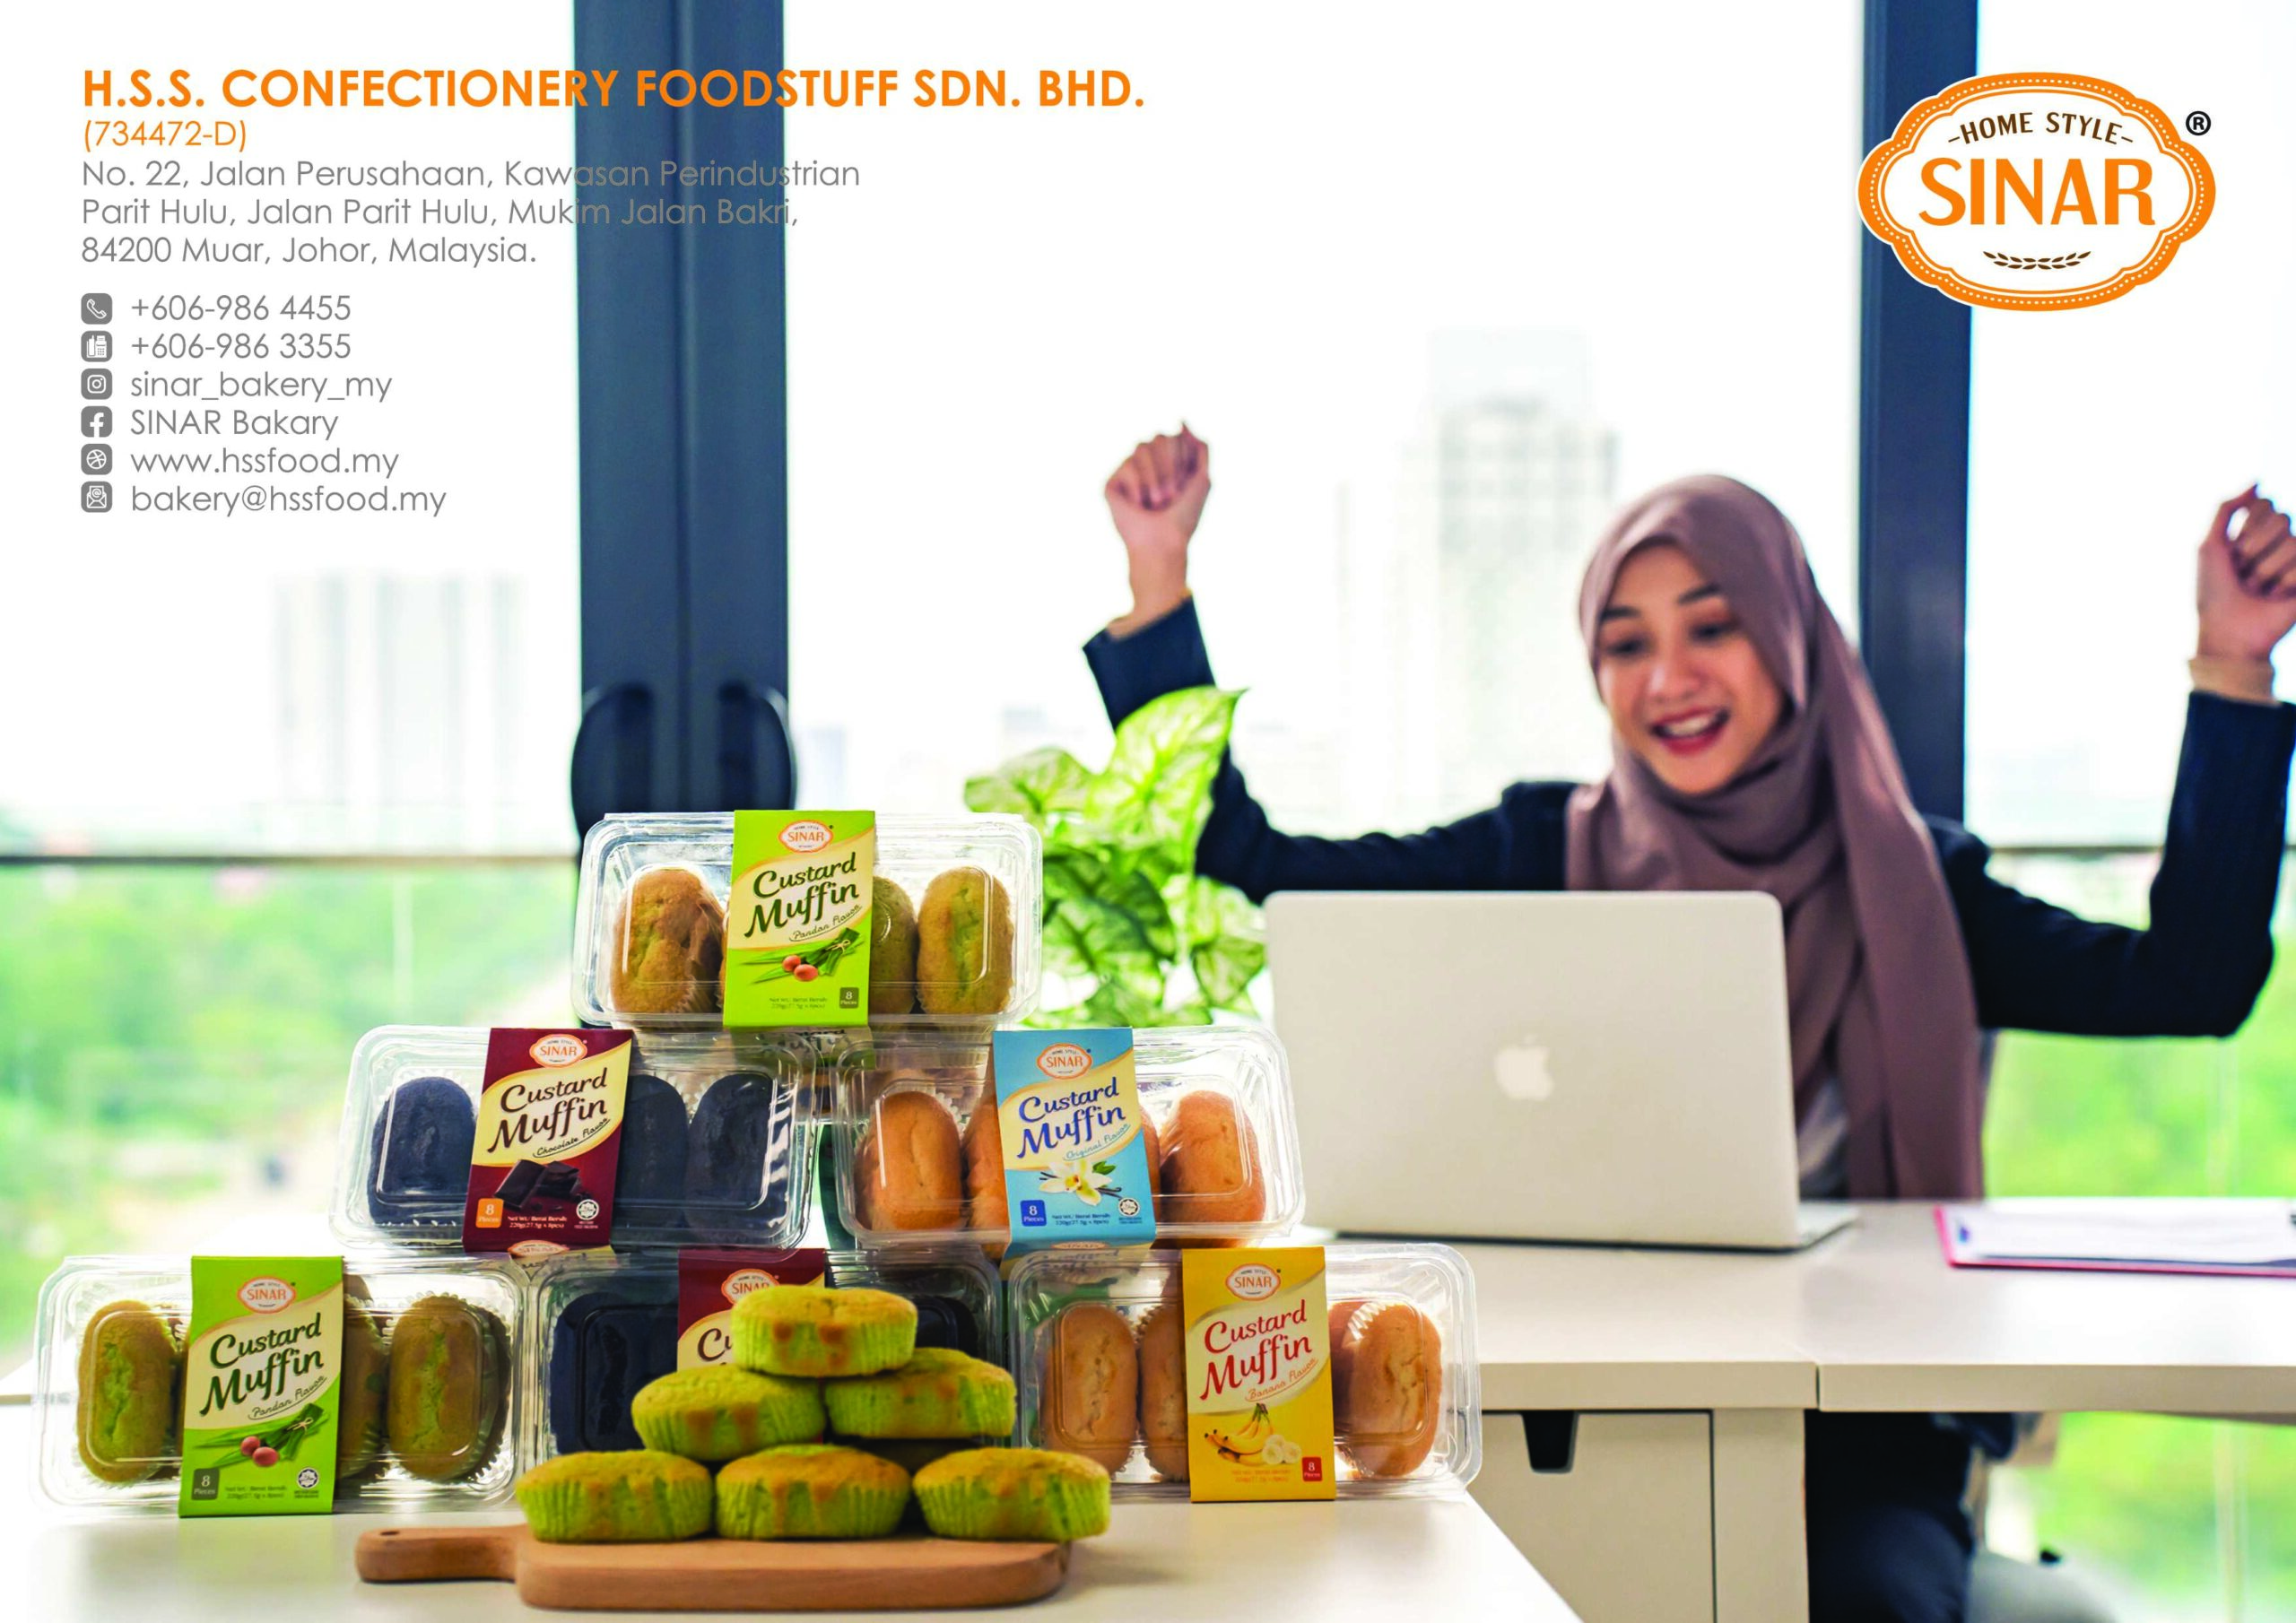 H.S.S. CONFECTIONERY FOODSTUFF SDN. BHD.